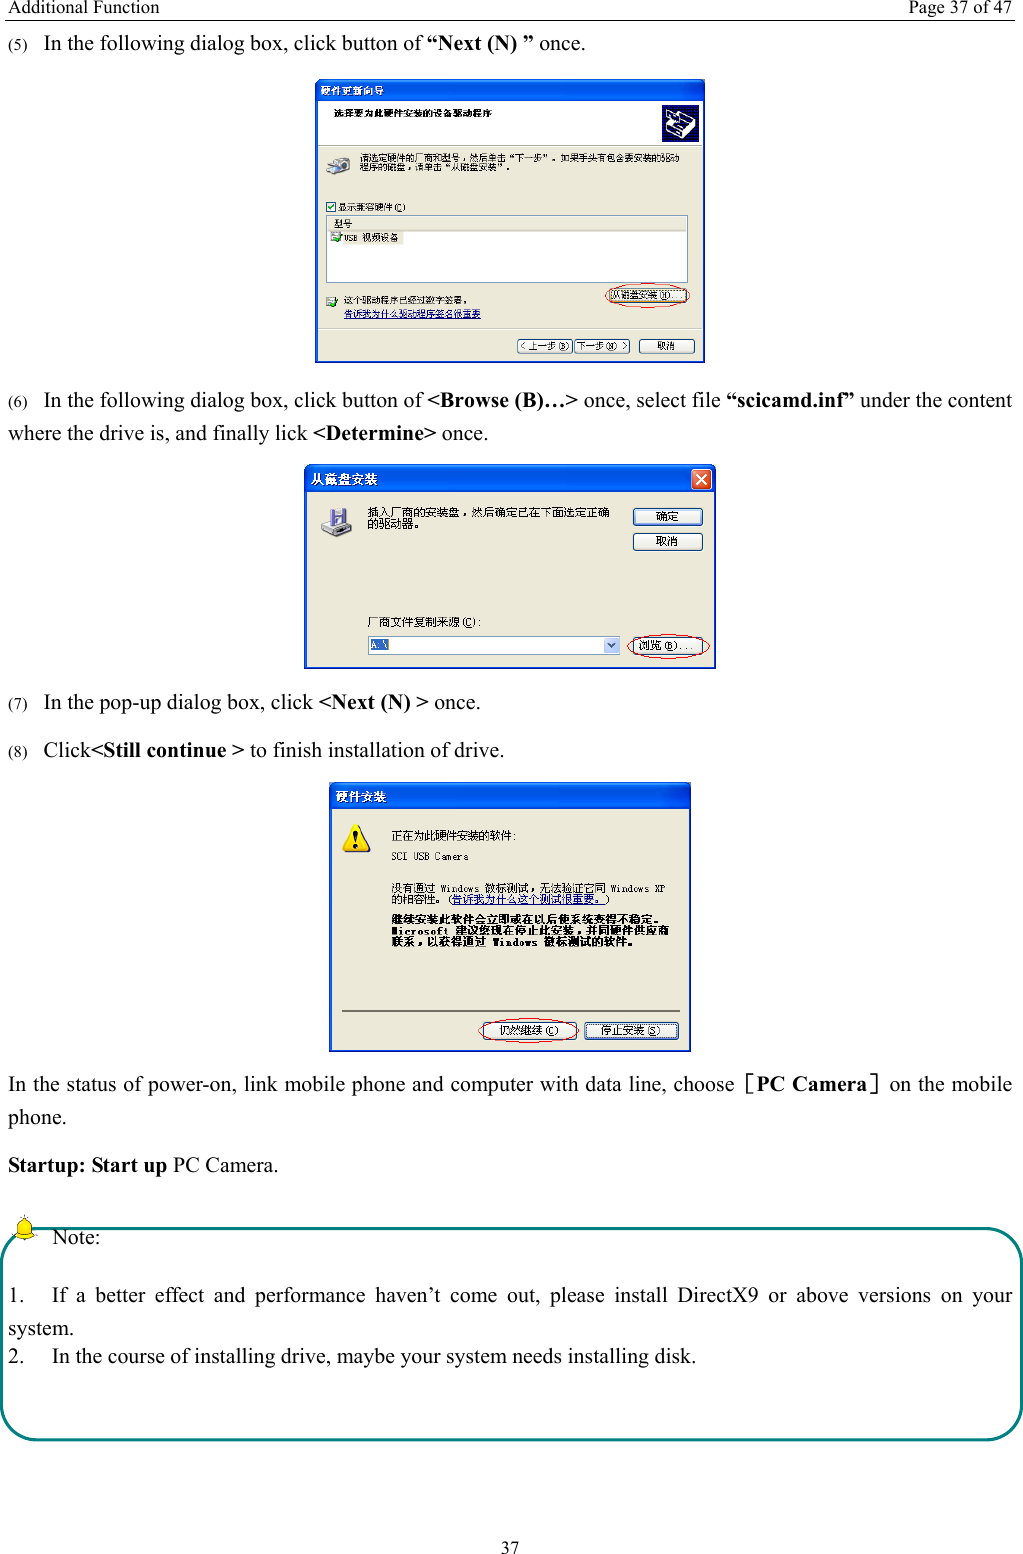 Additional Function  Page 37 of 47 37 (5) In the following dialog box, click button of “Next (N) ” once.  (6) In the following dialog box, click button of &lt;Browse (B)…&gt; once, select file “scicamd.inf” under the content where the drive is, and finally lick &lt;Determine&gt; once.  (7) In the pop-up dialog box, click &lt;Next (N) &gt; once. (8) Click&lt;Still continue &gt; to finish installation of drive.  In the status of power-on, link mobile phone and computer with data line, choose［PC Camera］on the mobile phone. Startup: Start up PC Camera.  Note: 1.  If a better effect and performance haven’t come out, please install DirectX9 or above versions on your system.  2.  In the course of installing drive, maybe your system needs installing disk.    